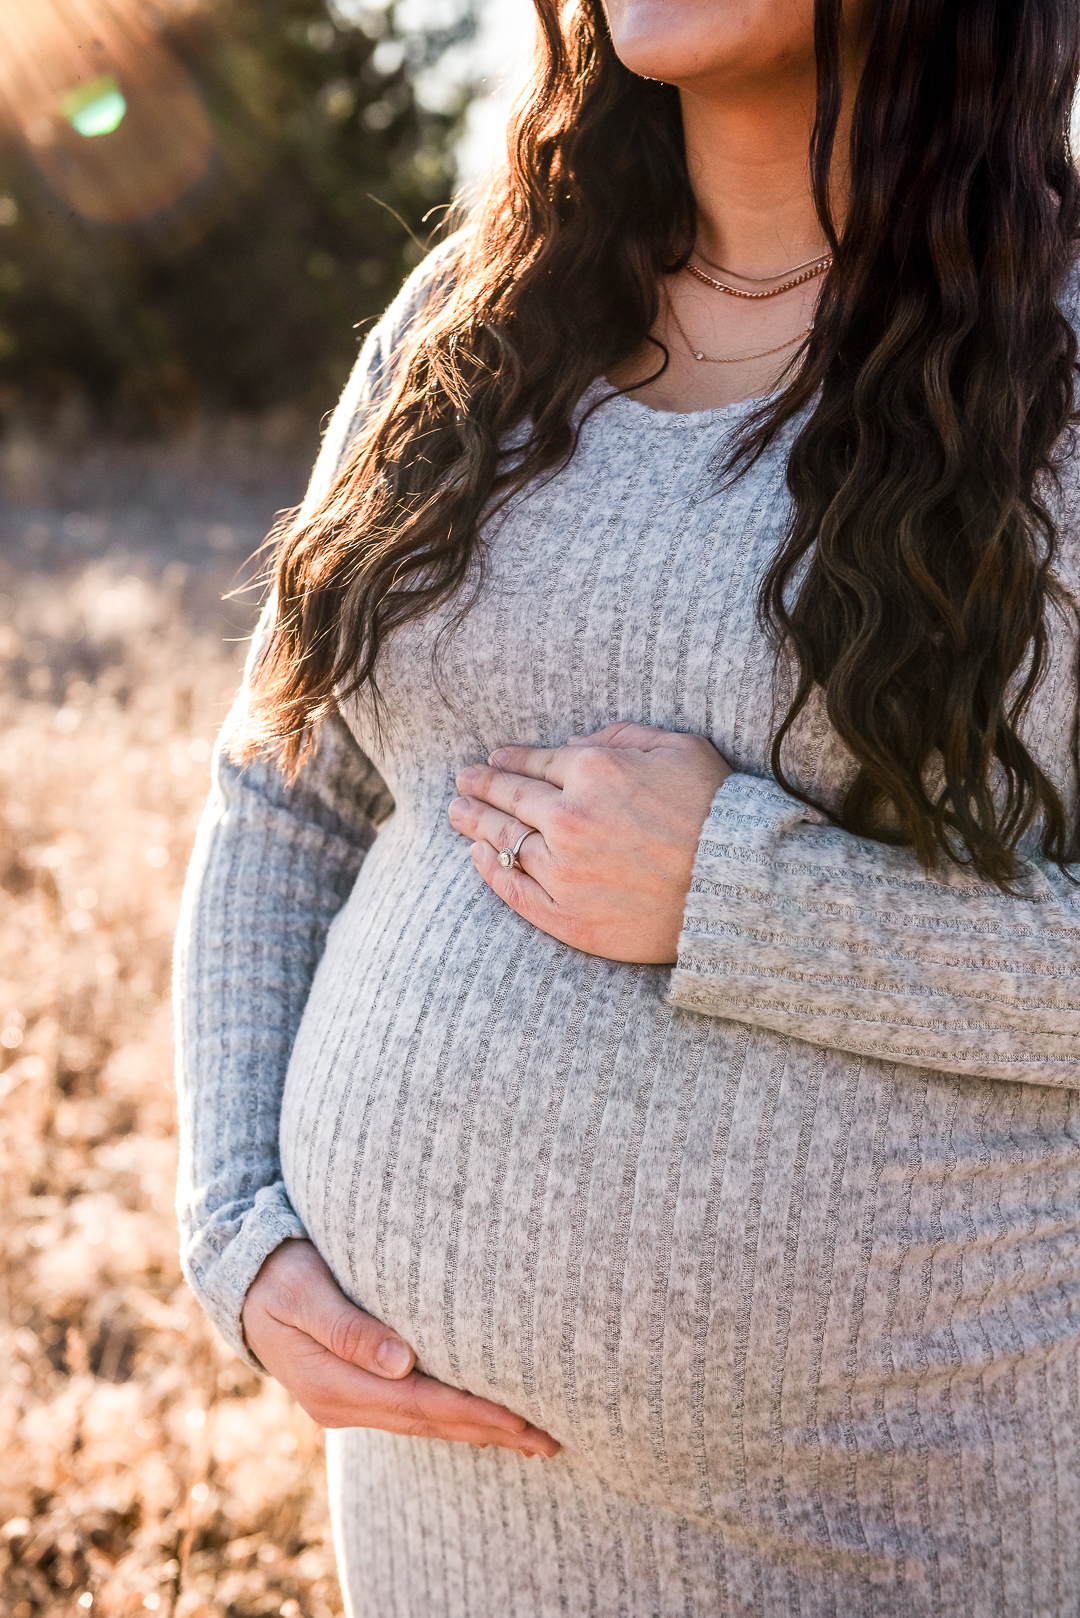 Local maternity photographer located in New Richmond, Wisconsin